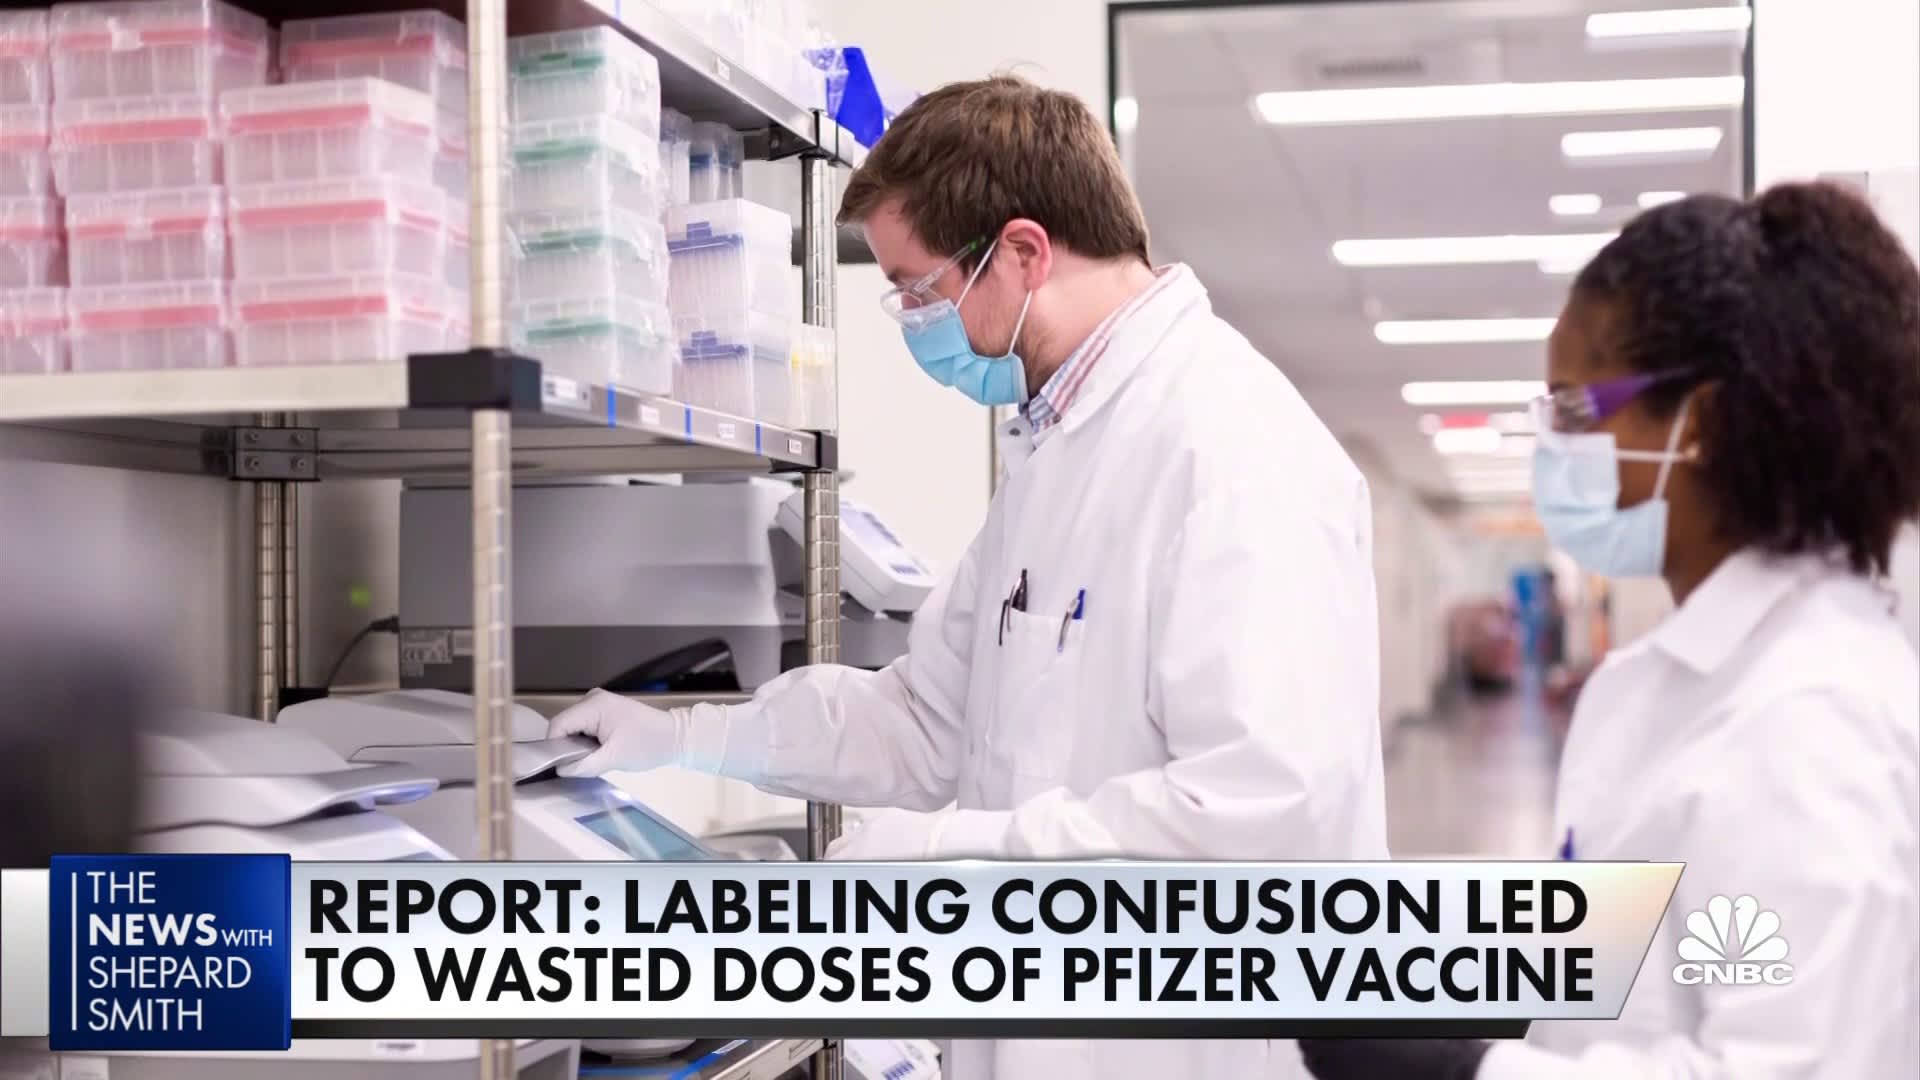 New report shows label confusion led to wasted doses of Pfizer vaccine